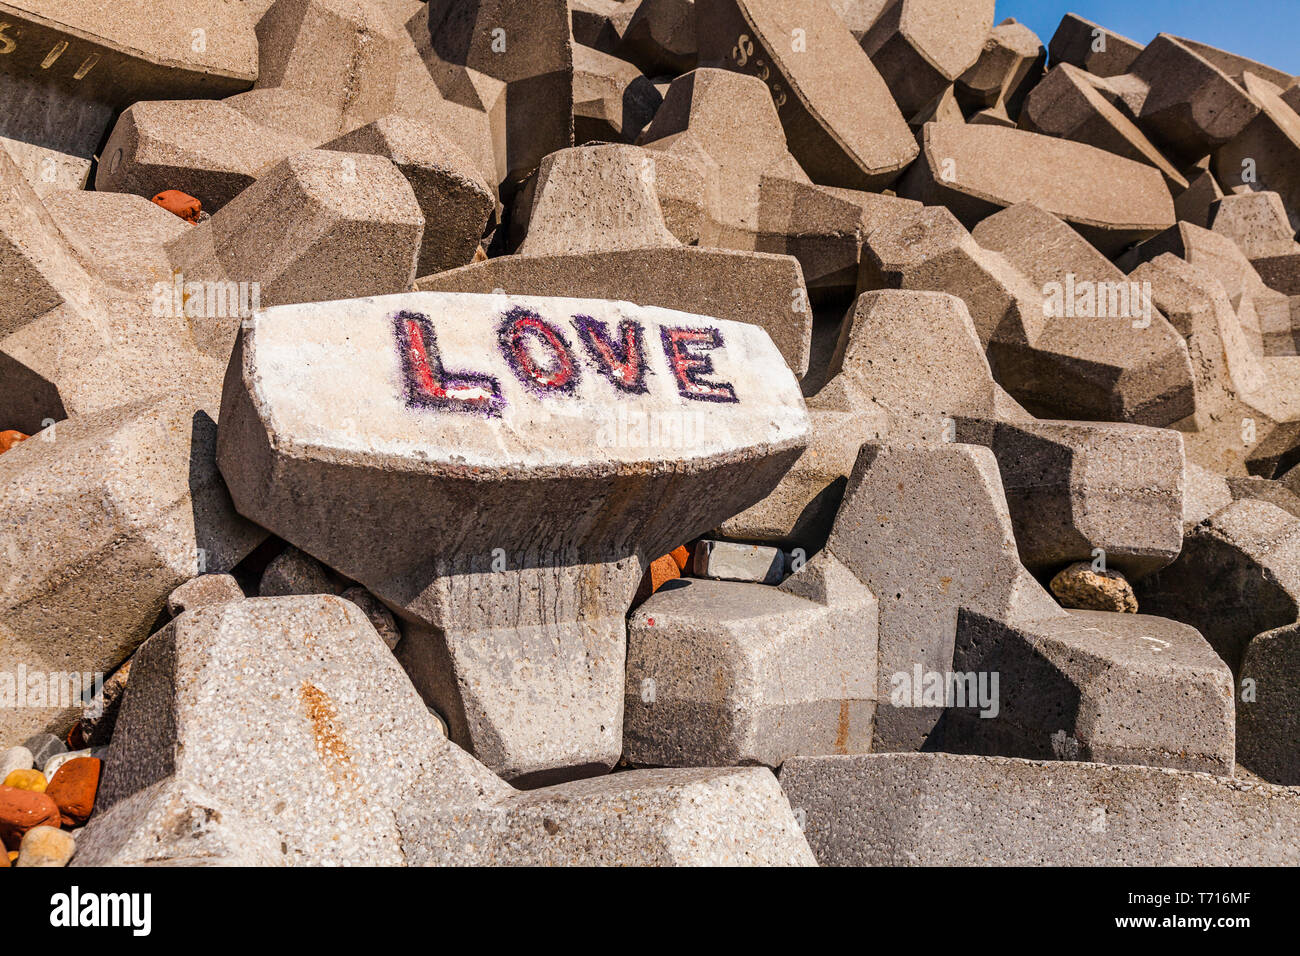 A concept of 'Love on the Rocks' at Hartlepool,England,UK with the word 'Love' daubed in graffitti on the rocks on the beach Stock Photo